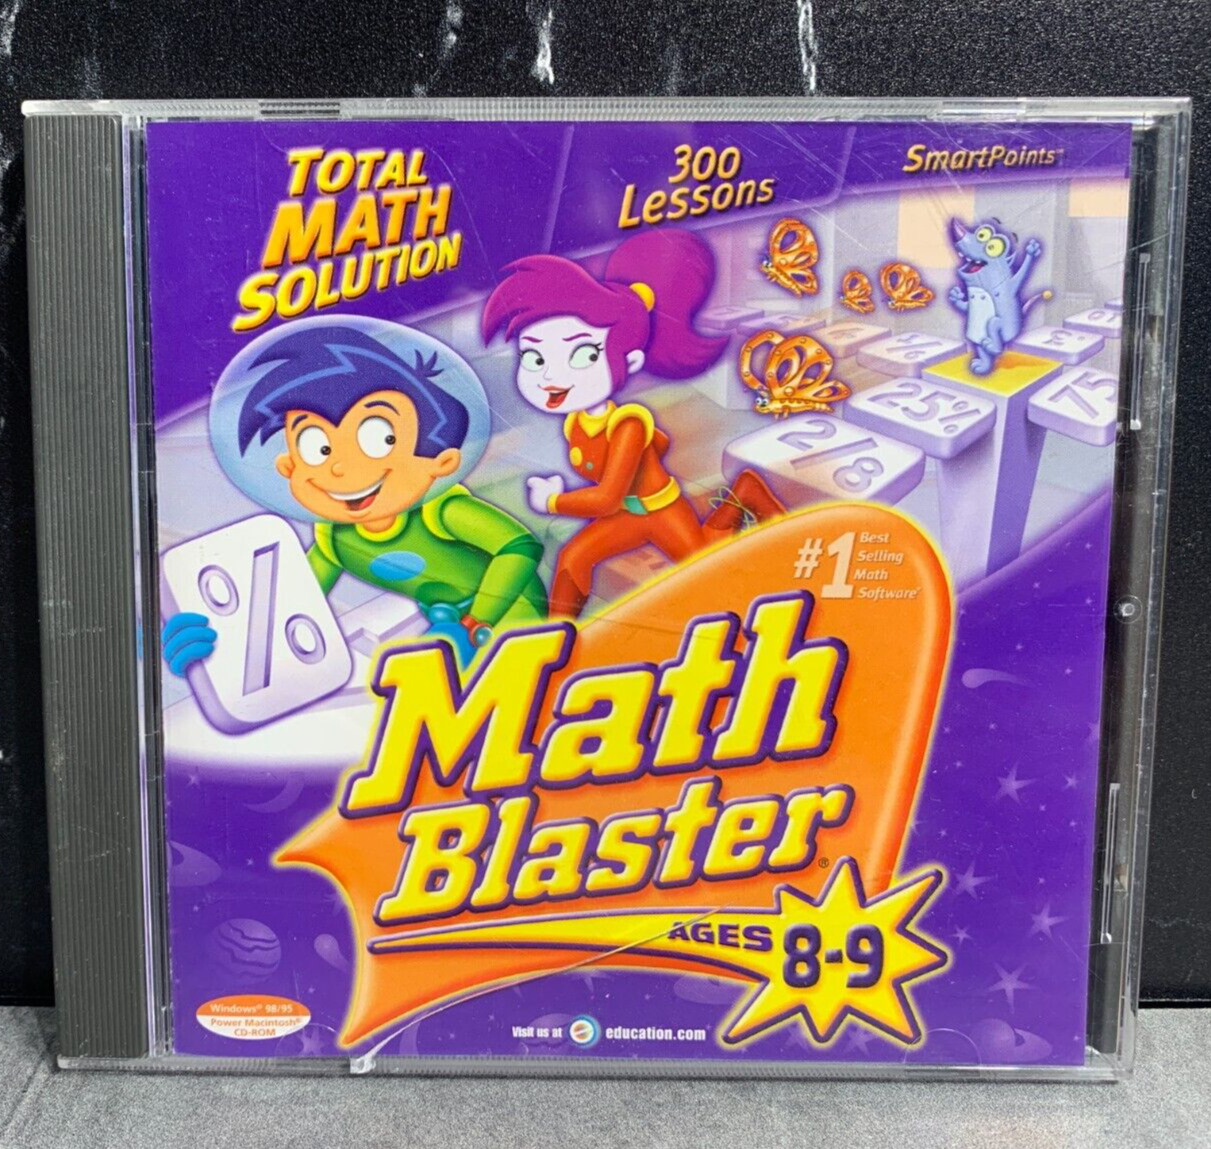 Math Blaster: Total Math Solution - 300 Lessons - Ages 8 To 9 - Smartpoints 2000